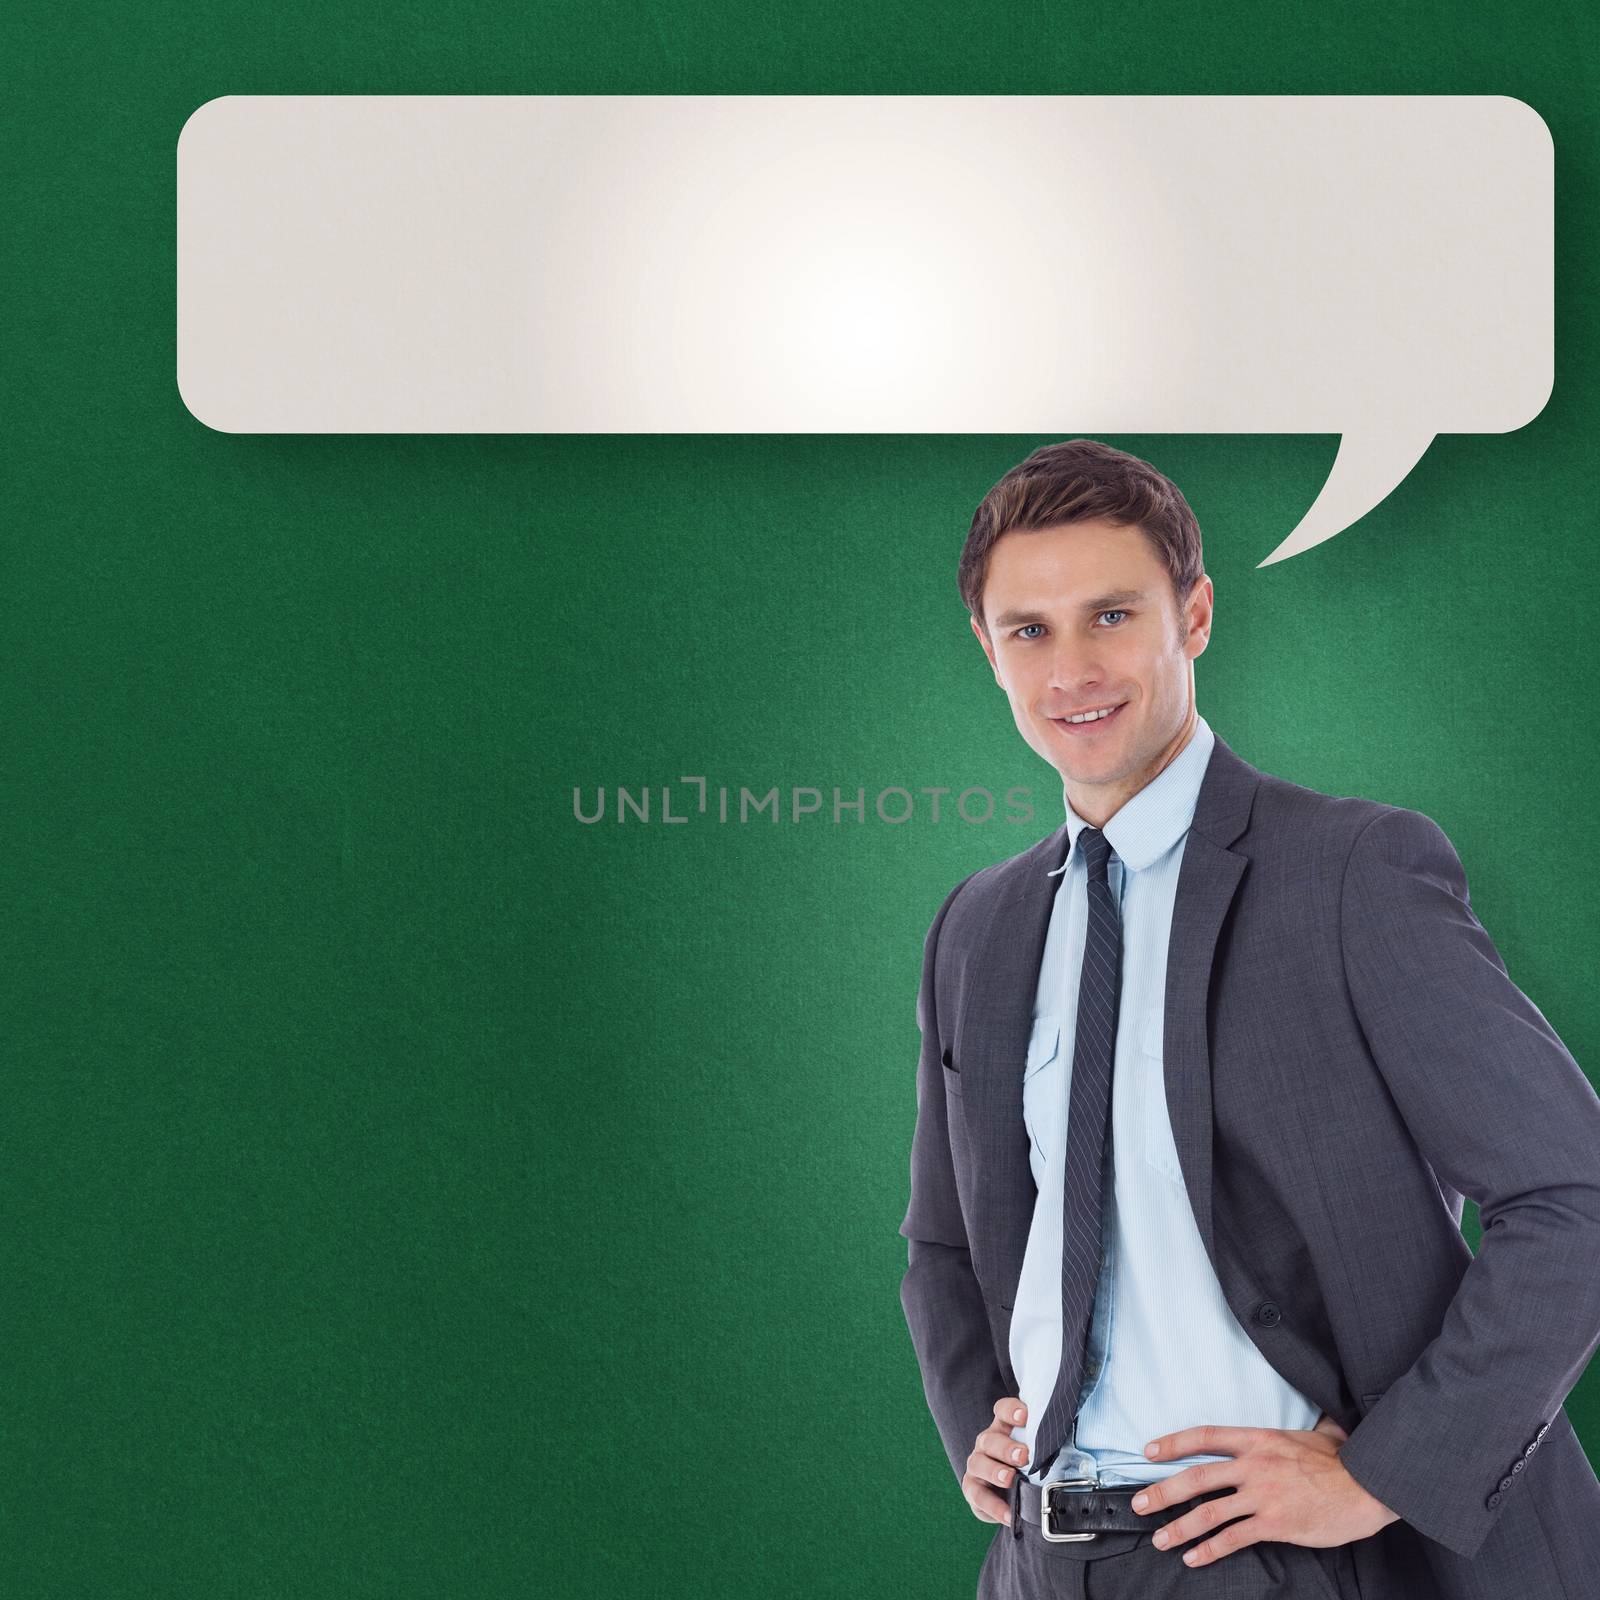 Smiling businessman with hands on hips against speech bubble